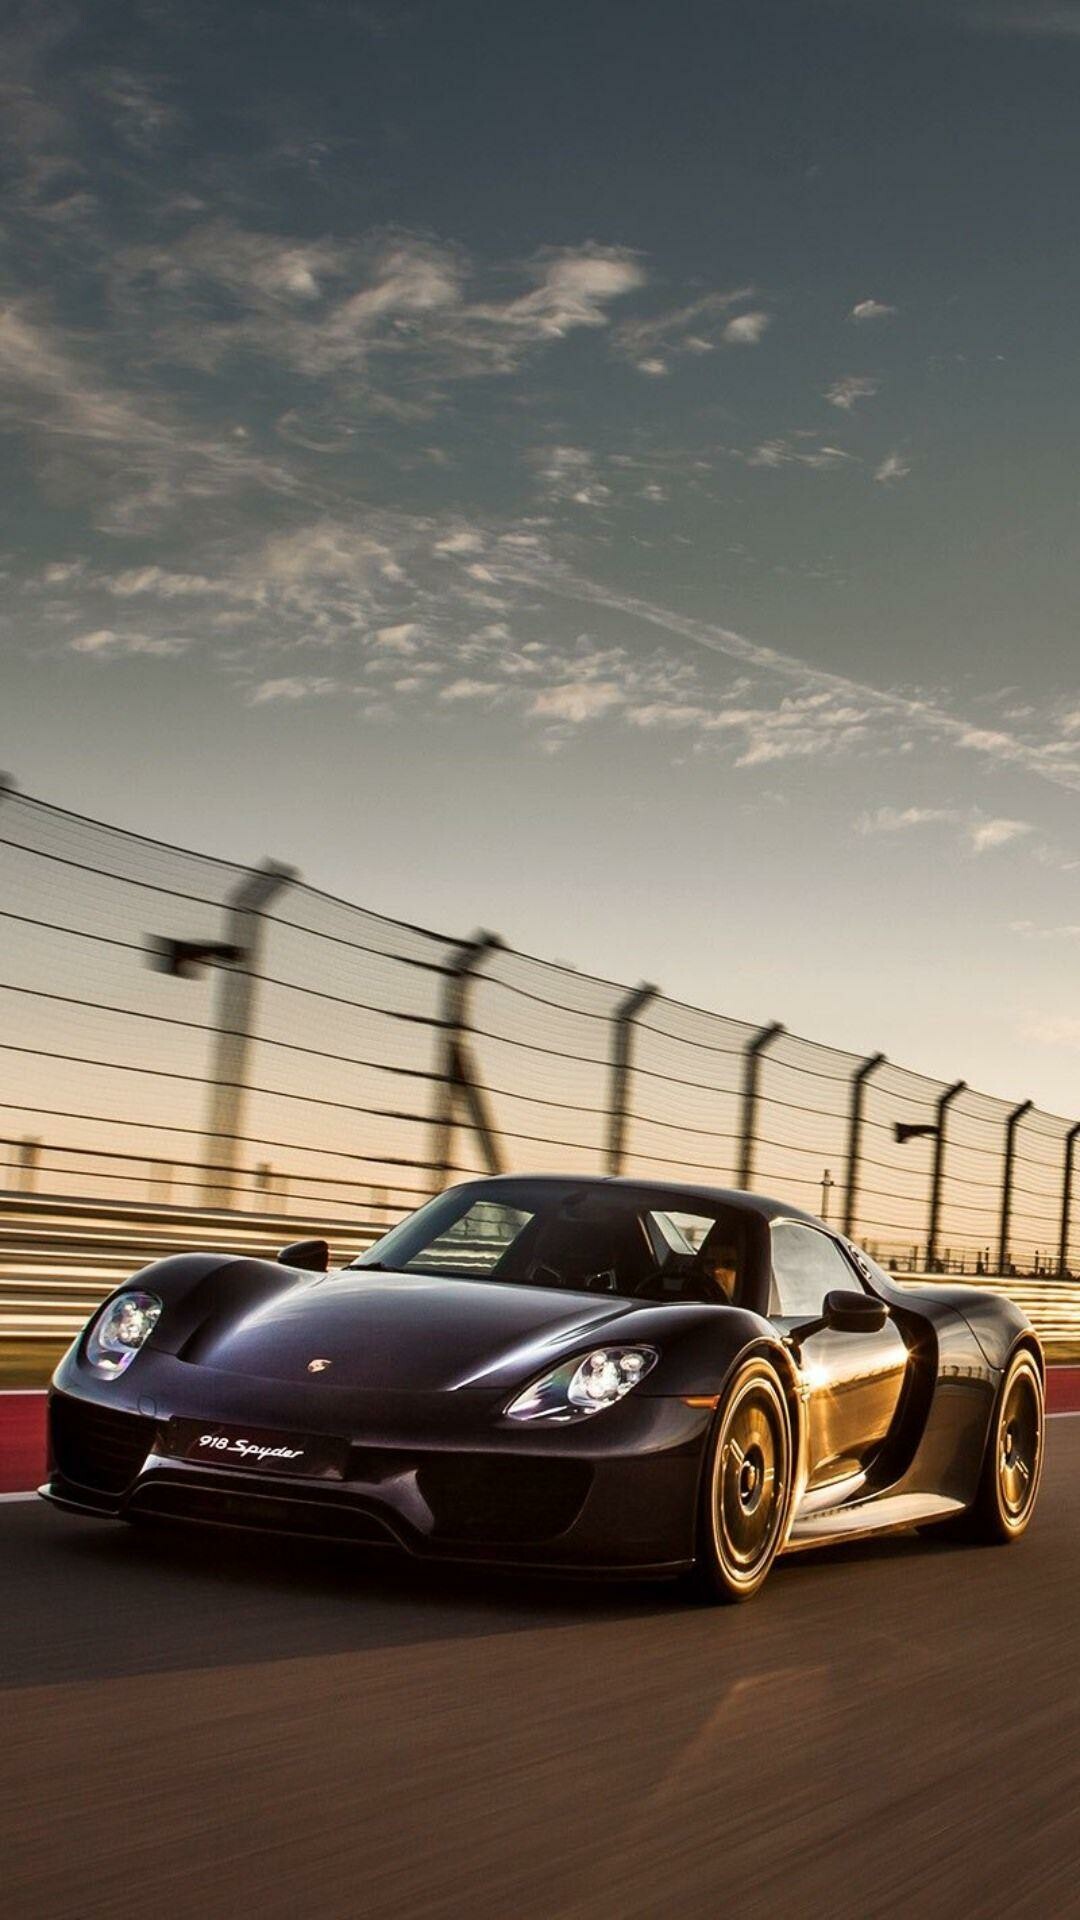 Porsche: The 918 Spyder is a limited-production mid-engine plug-in hybrid sports car manufactured by the German automobile manufacturer. 1080x1920 Full HD Background.